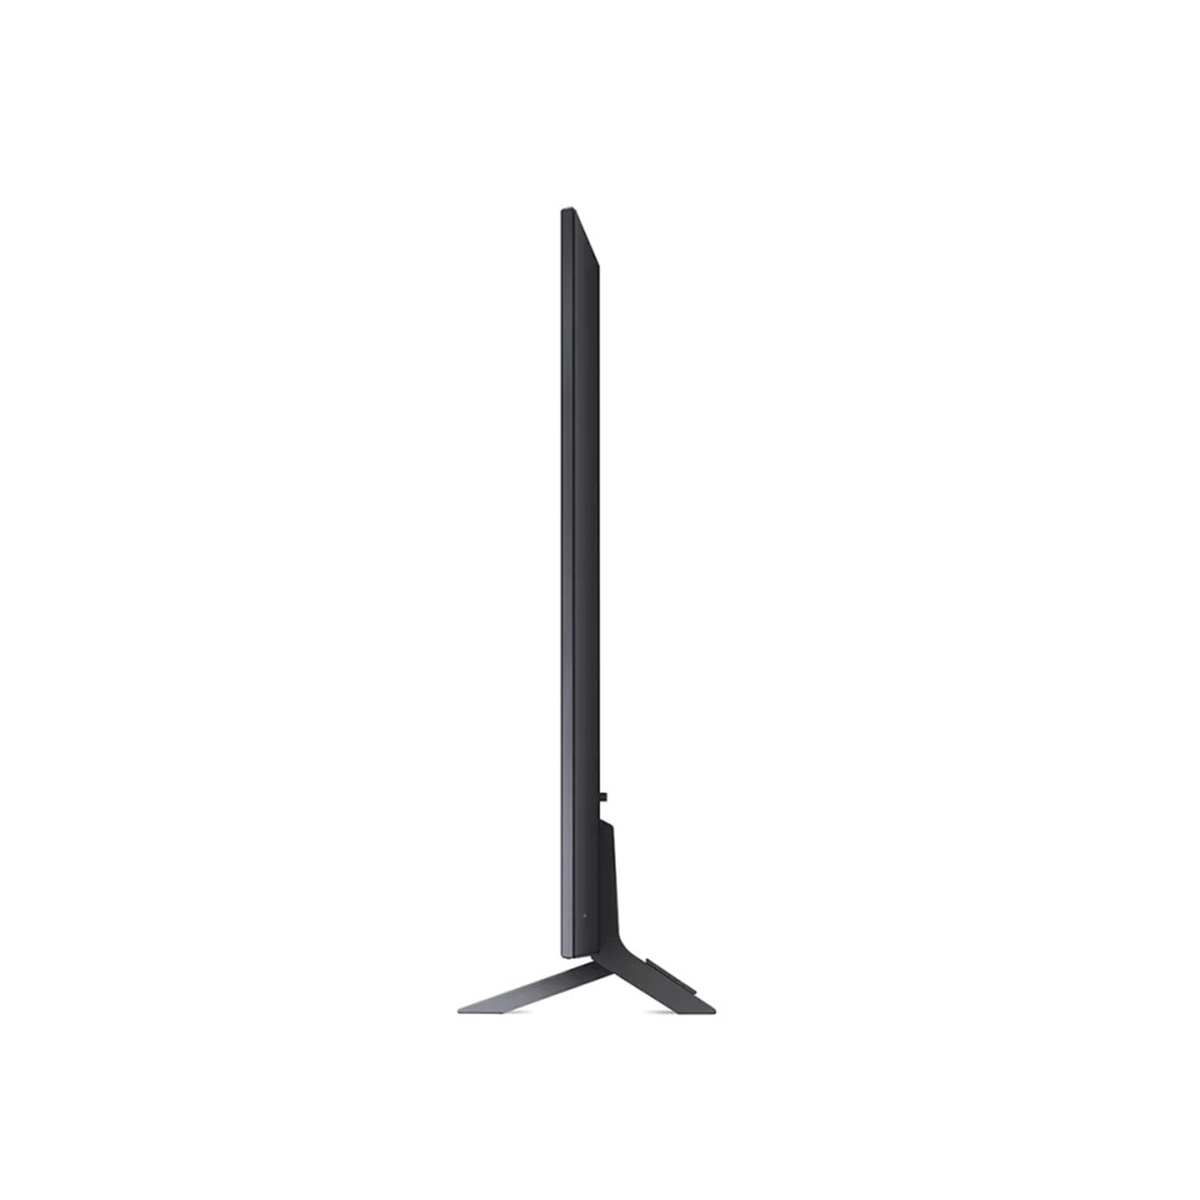 LG NanoCell TV 55 Inch NANO80 Series Cinema Screen Design, New 2021 4K Active HDR webOS Smart with ThinQ AI Local Dimming